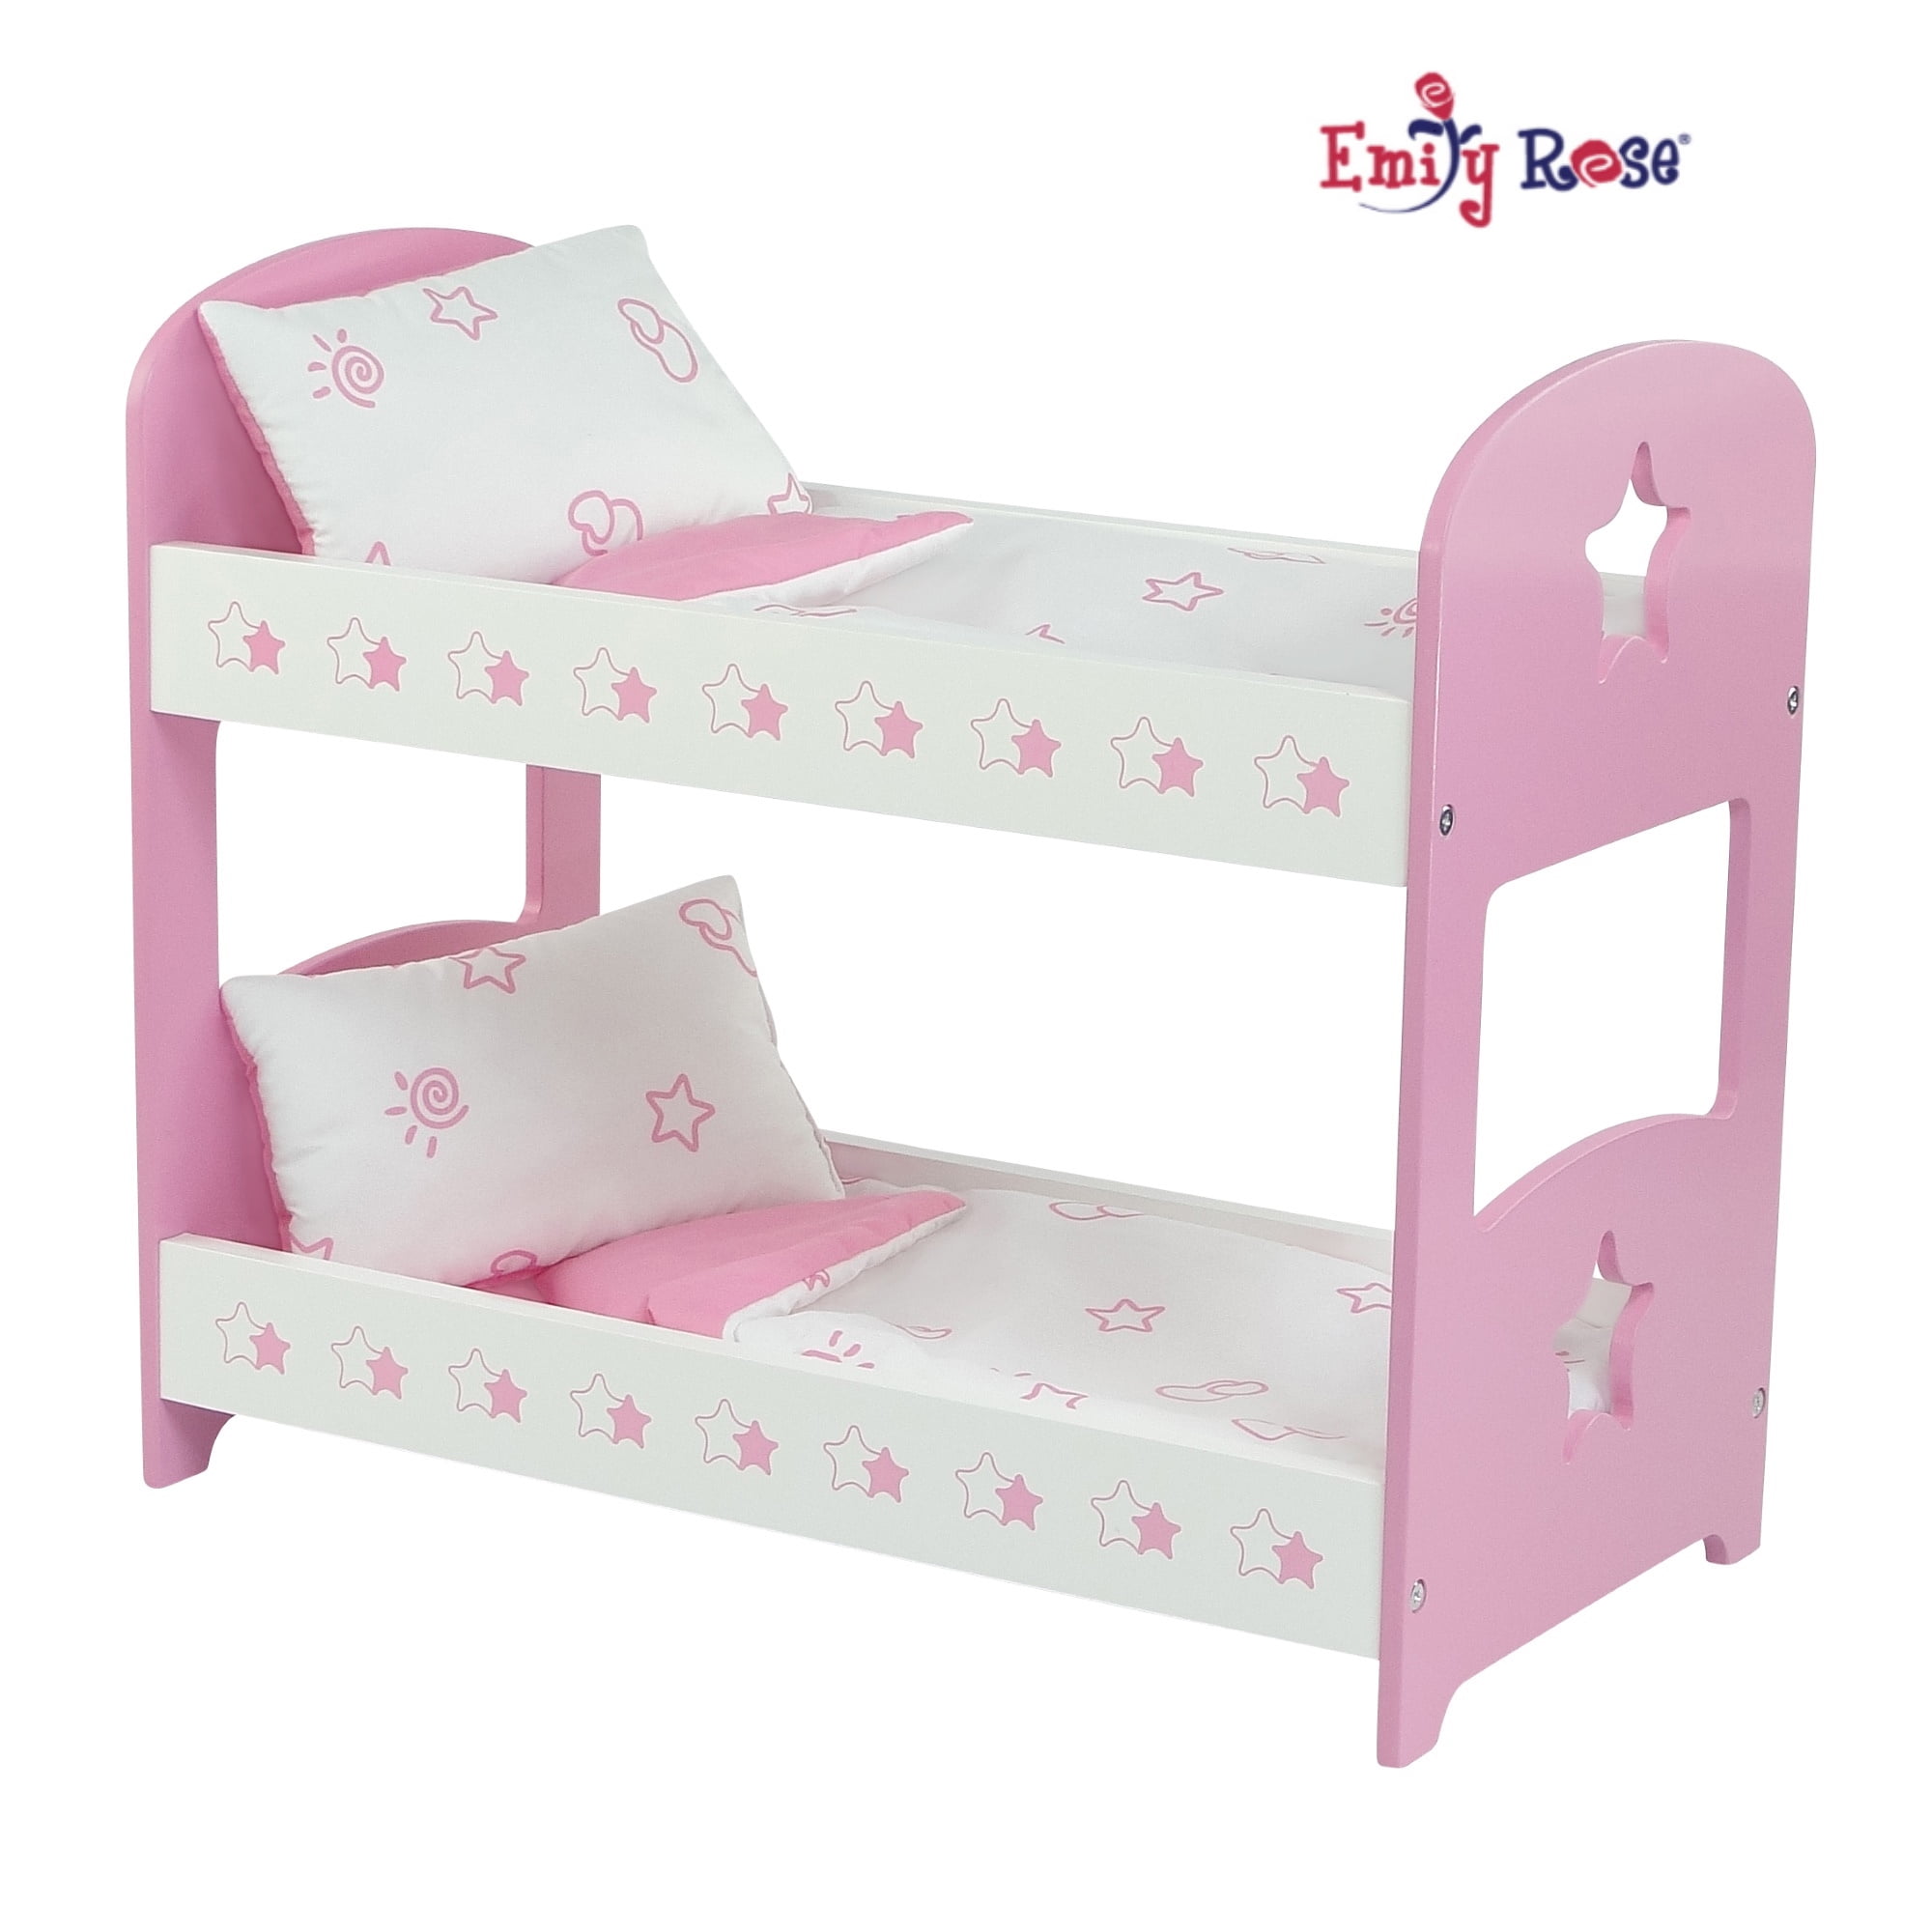 18 Inch Doll Bunk Bed Furniture, Wooden Bunk Beds For 18 Dolls